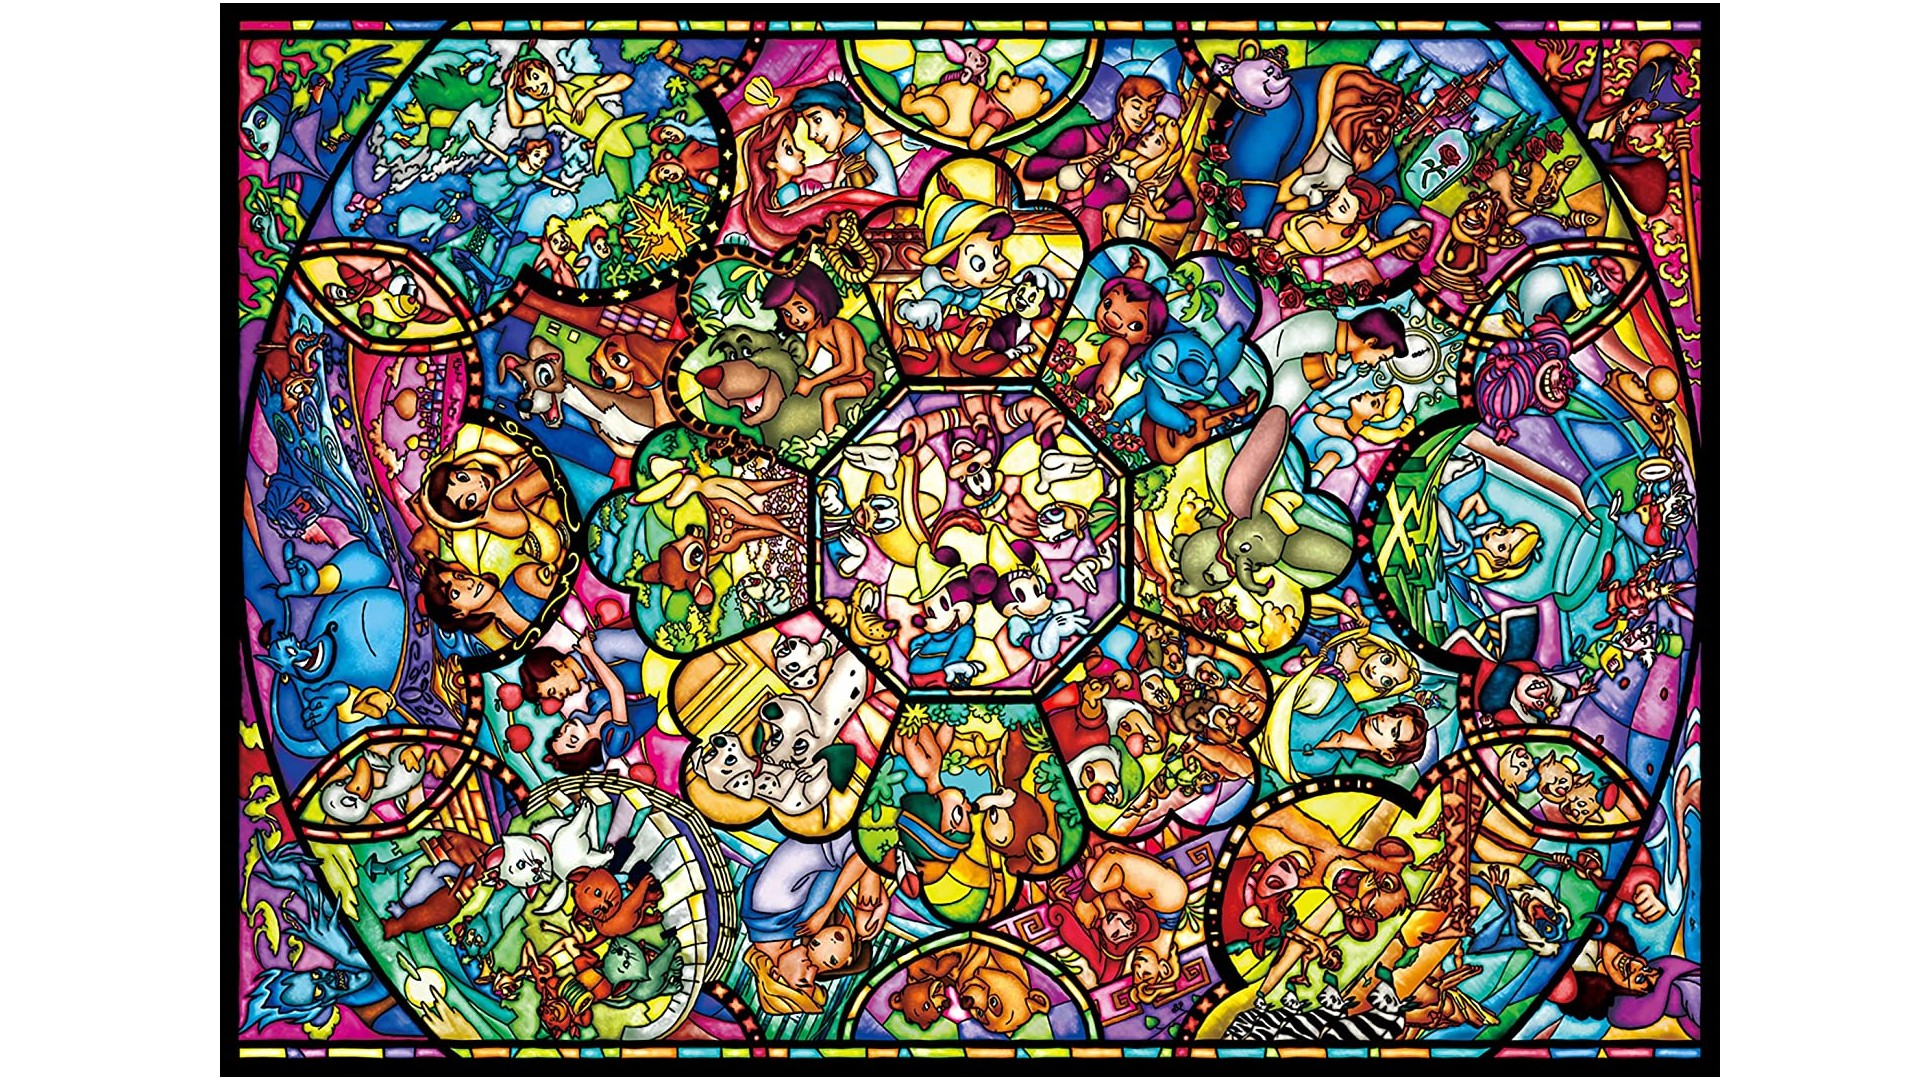 Multiple Disney characters depicted in stained-glass style jigsaw puzzle